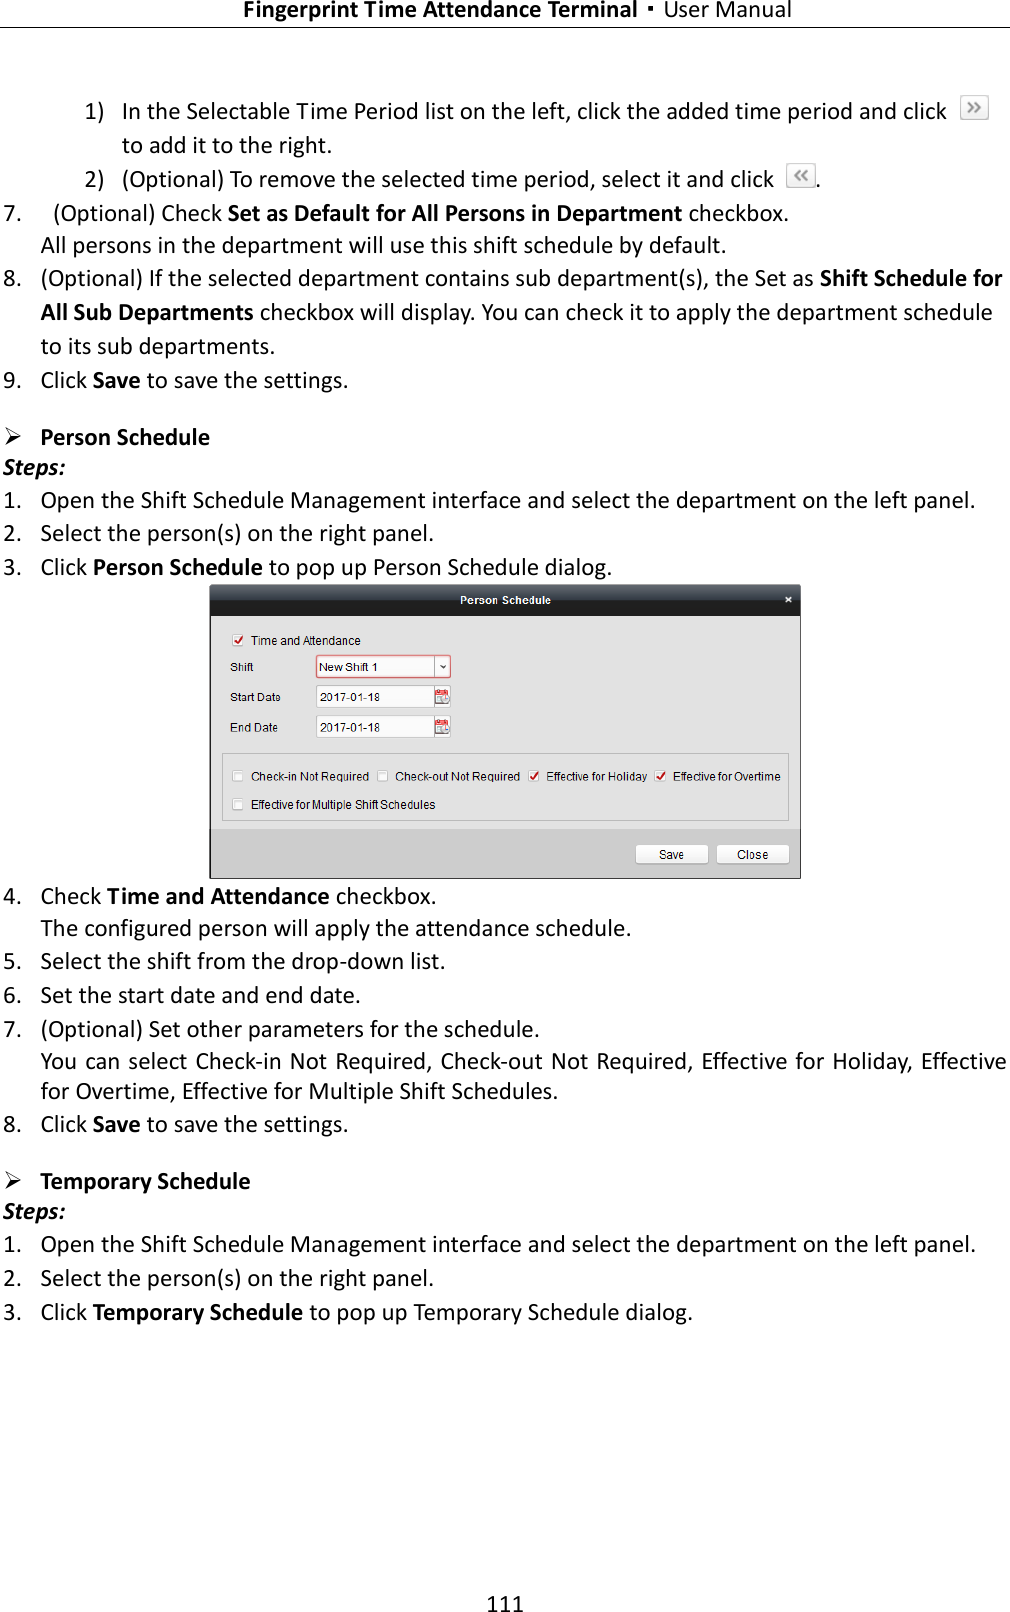   Fingerprint Time Attendance Terminal·User Manual 111  1) In the Selectable Time Period list on the left, click the added time period and click   to add it to the right.   2) (Optional) To remove the selected time period, select it and click  . 7.   (Optional) Check Set as Default for All Persons in Department checkbox. All persons in the department will use this shift schedule by default. 8. (Optional) If the selected department contains sub department(s), the Set as Shift Schedule for All Sub Departments checkbox will display. You can check it to apply the department schedule to its sub departments. 9. Click Save to save the settings.  Person Schedule Steps: 1. Open the Shift Schedule Management interface and select the department on the left panel.   2. Select the person(s) on the right panel. 3. Click Person Schedule to pop up Person Schedule dialog.  4. Check Time and Attendance checkbox. The configured person will apply the attendance schedule. 5. Select the shift from the drop-down list. 6. Set the start date and end date. 7. (Optional) Set other parameters for the schedule. You can select Check-in Not Required, Check-out Not Required, Effective for Holiday, Effective for Overtime, Effective for Multiple Shift Schedules. 8. Click Save to save the settings.  Temporary Schedule Steps: 1. Open the Shift Schedule Management interface and select the department on the left panel.   2. Select the person(s) on the right panel. 3. Click Temporary Schedule to pop up Temporary Schedule dialog. 